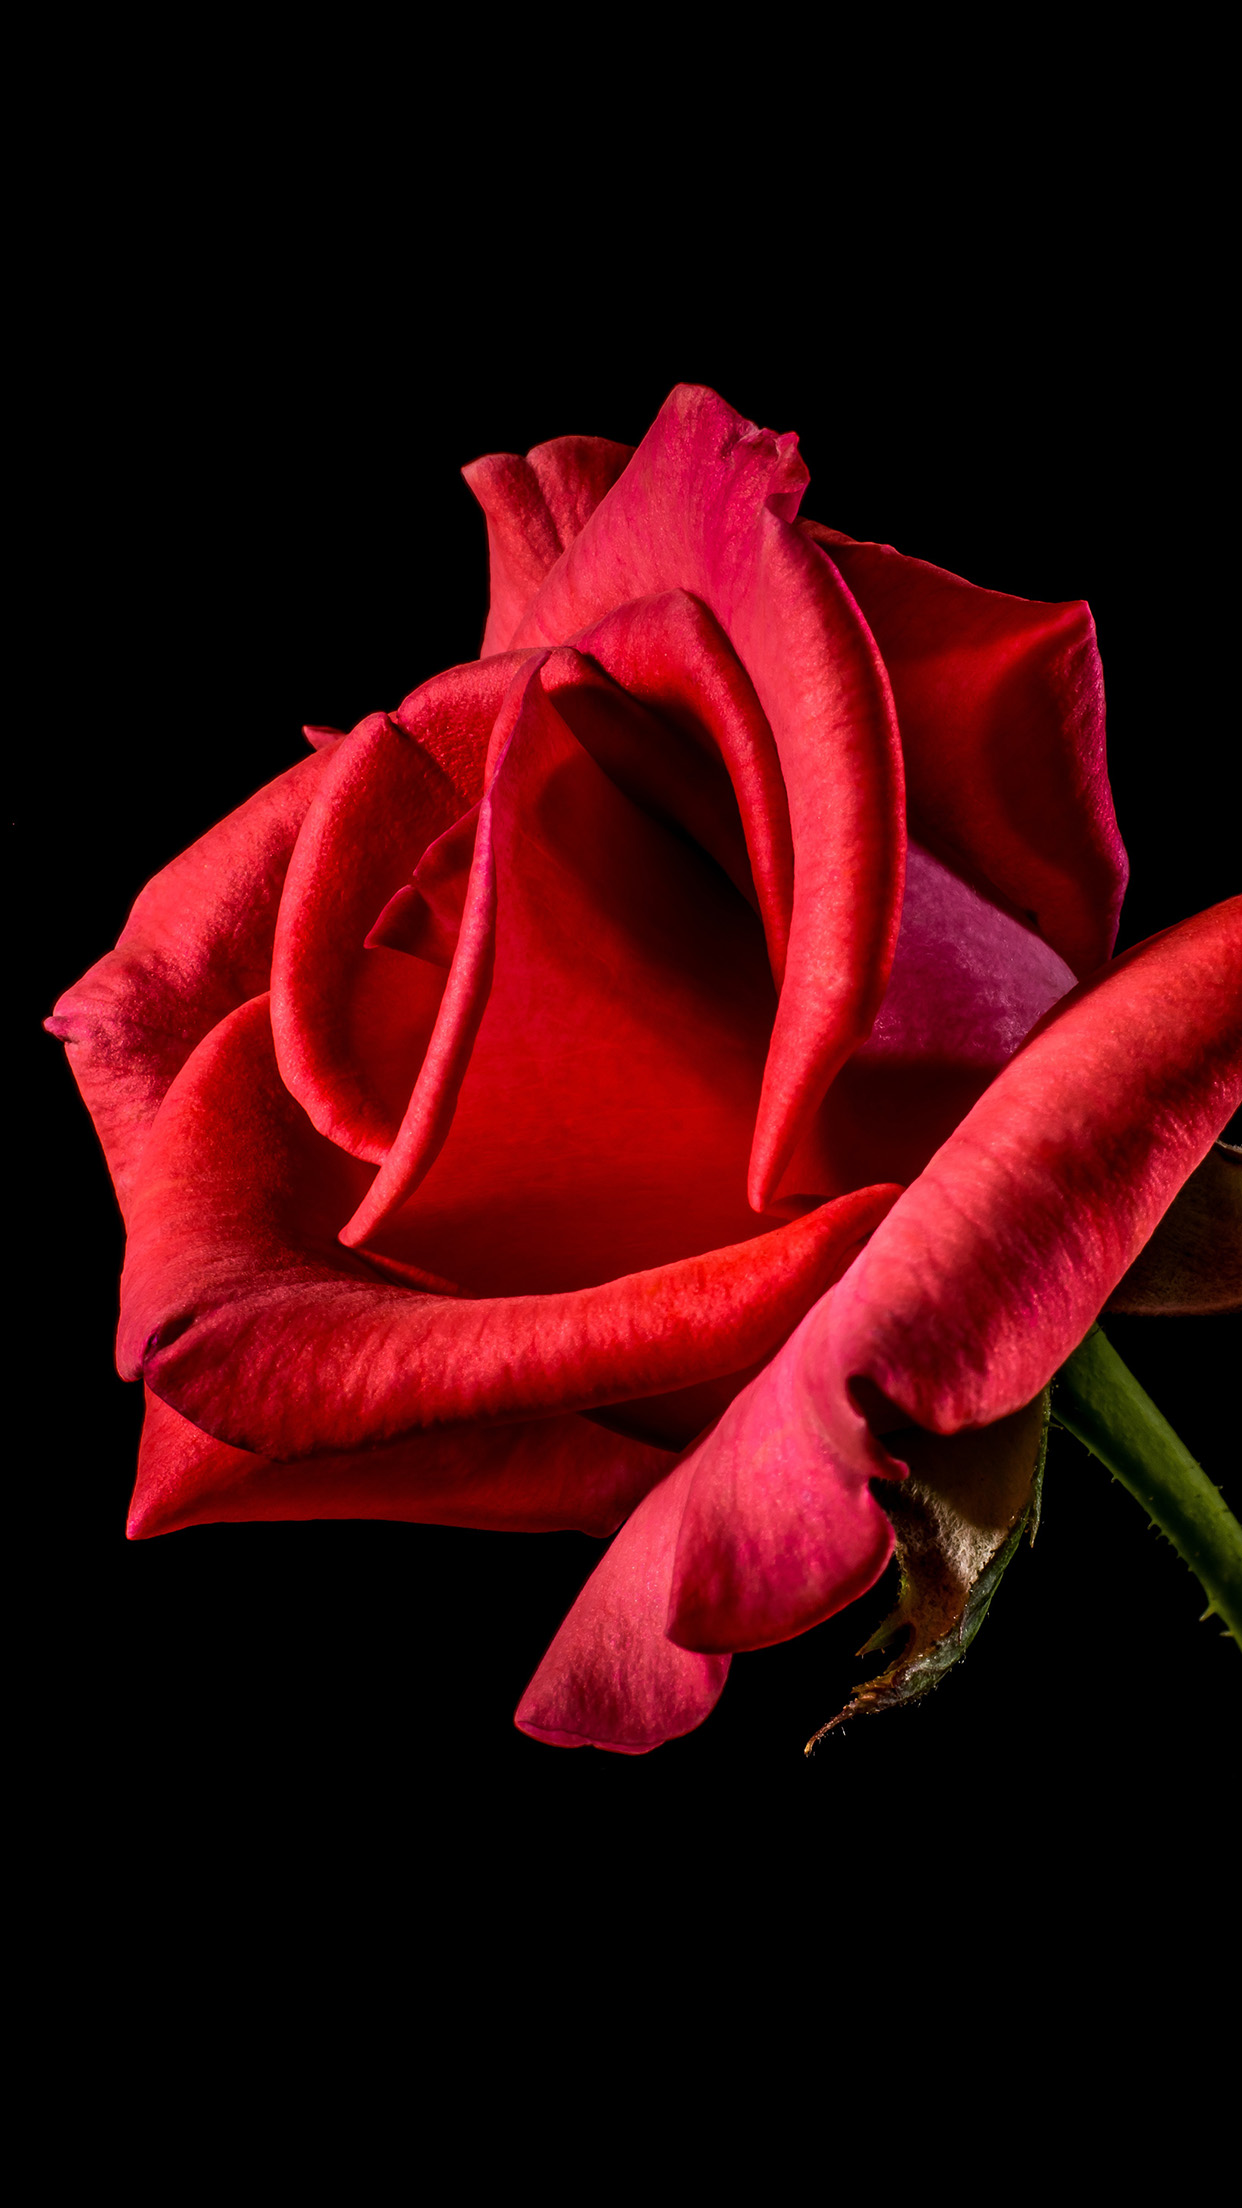 Flower Rose Red Dark Beautiful Best Nature Android - Rose Wallpaper For  Android - 1242x2208 Wallpaper 